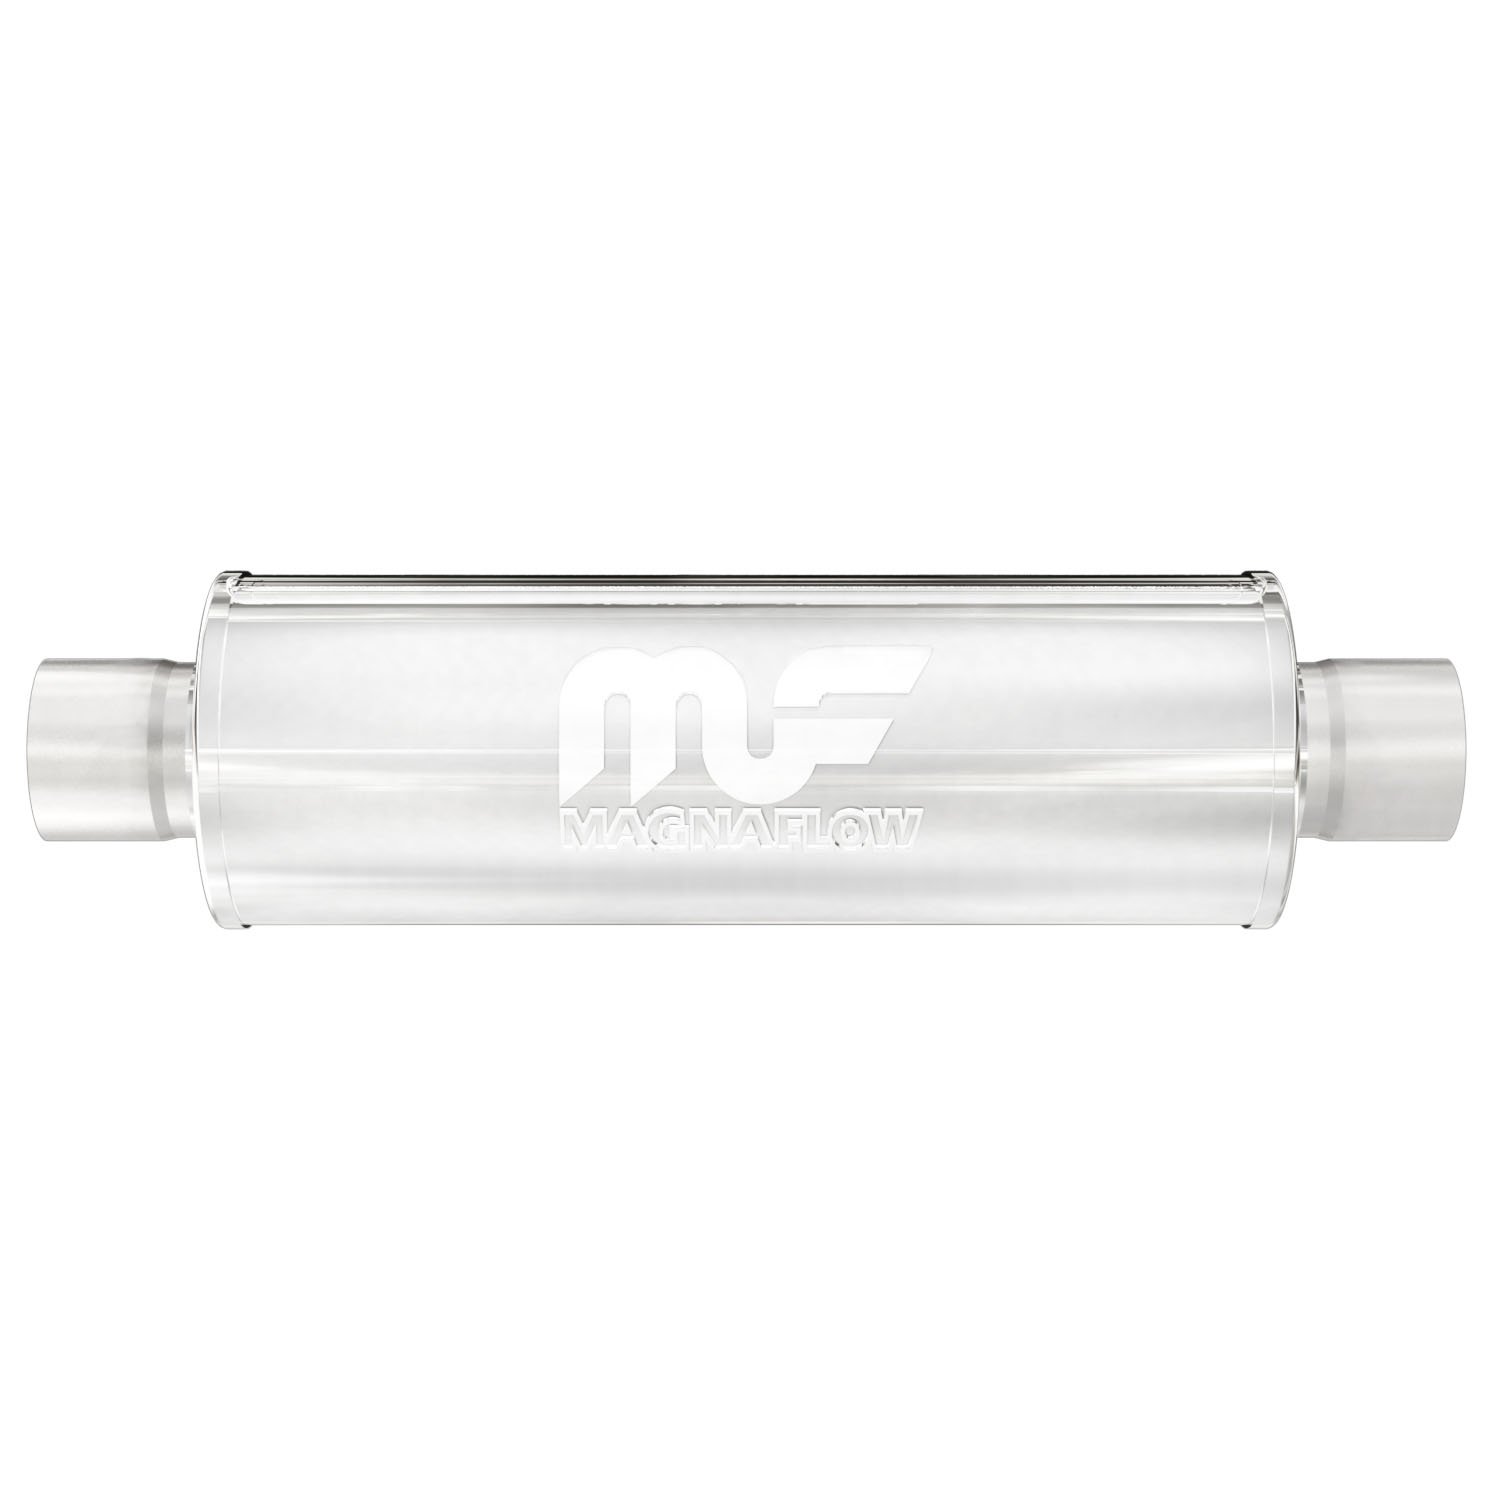 4" Round Muffler, Center In/Center Out: 2.25", Body Length: 14", Overall Length: 20", Core Size: 2.5" [Brushed Finish]